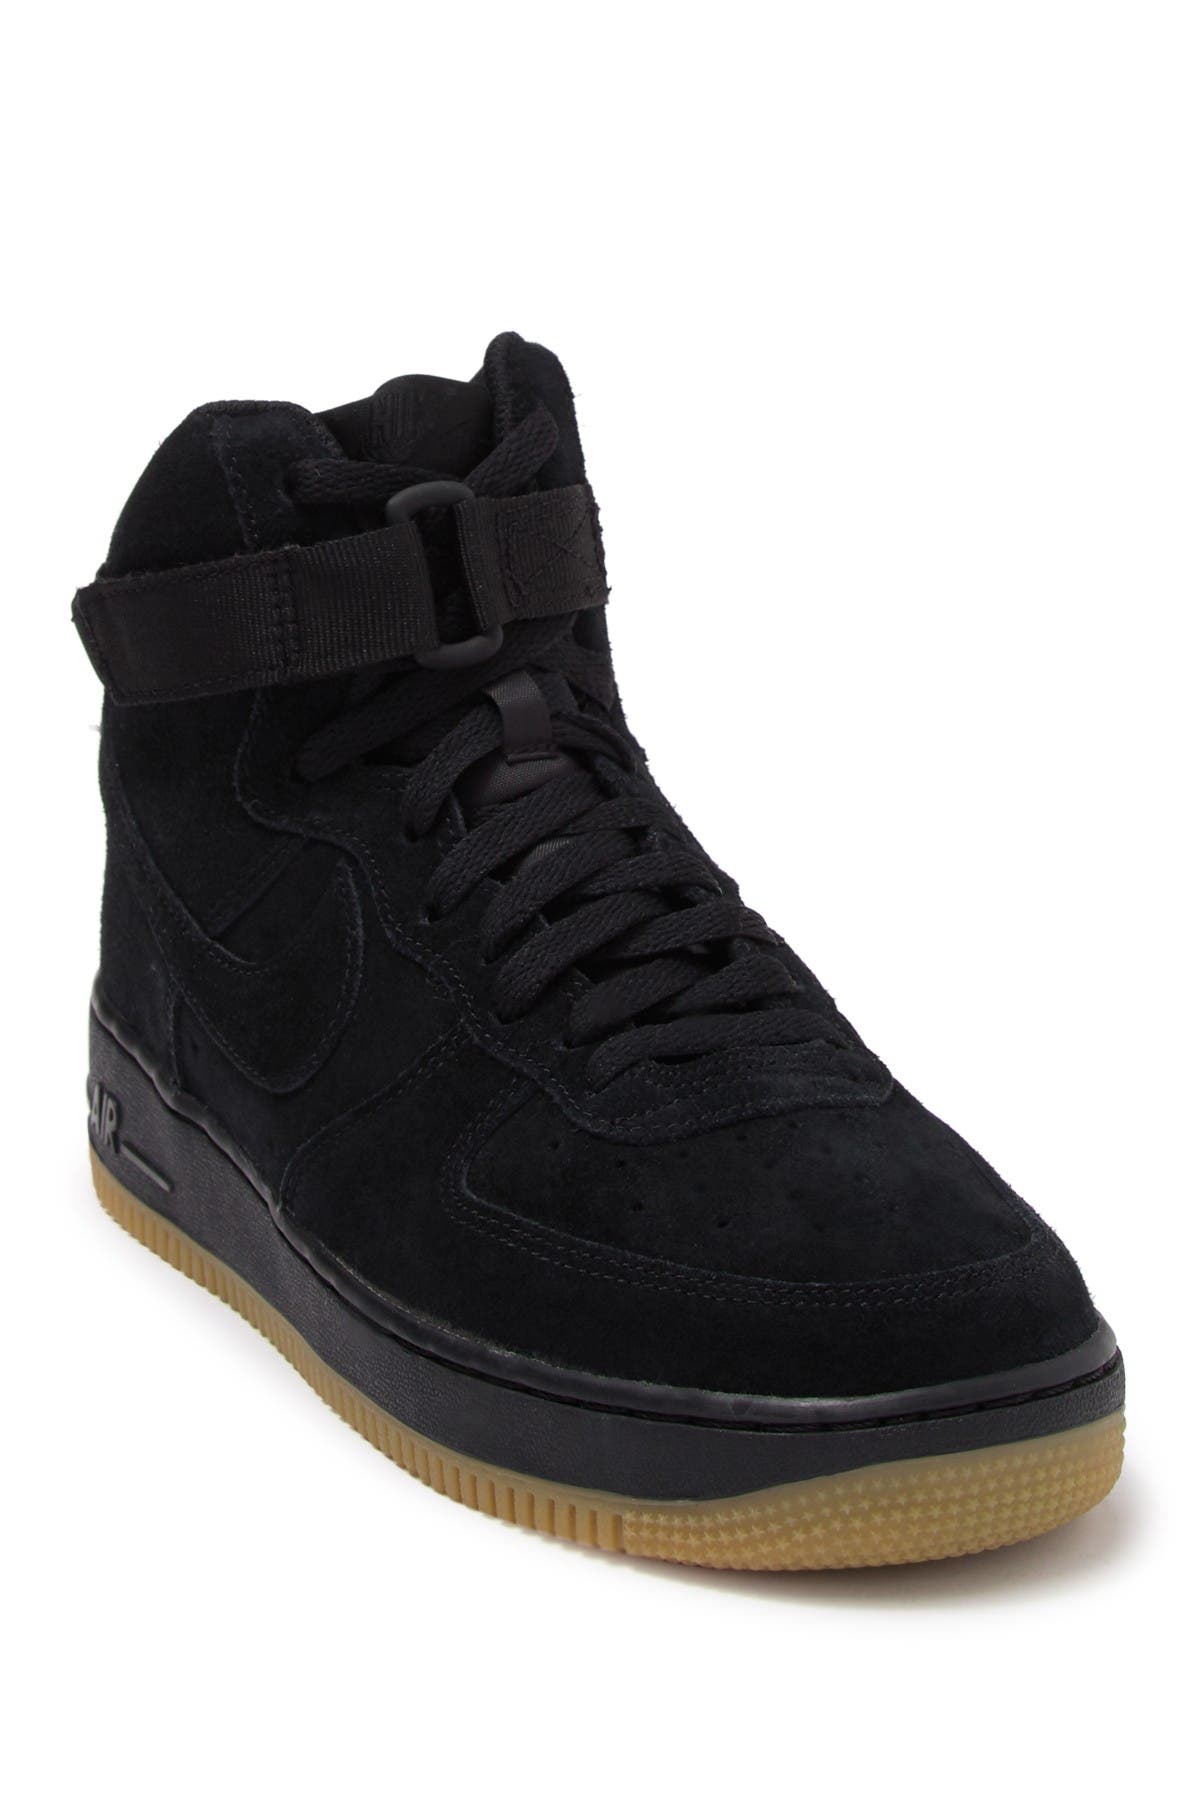 nike air force 1 womens high tops suede